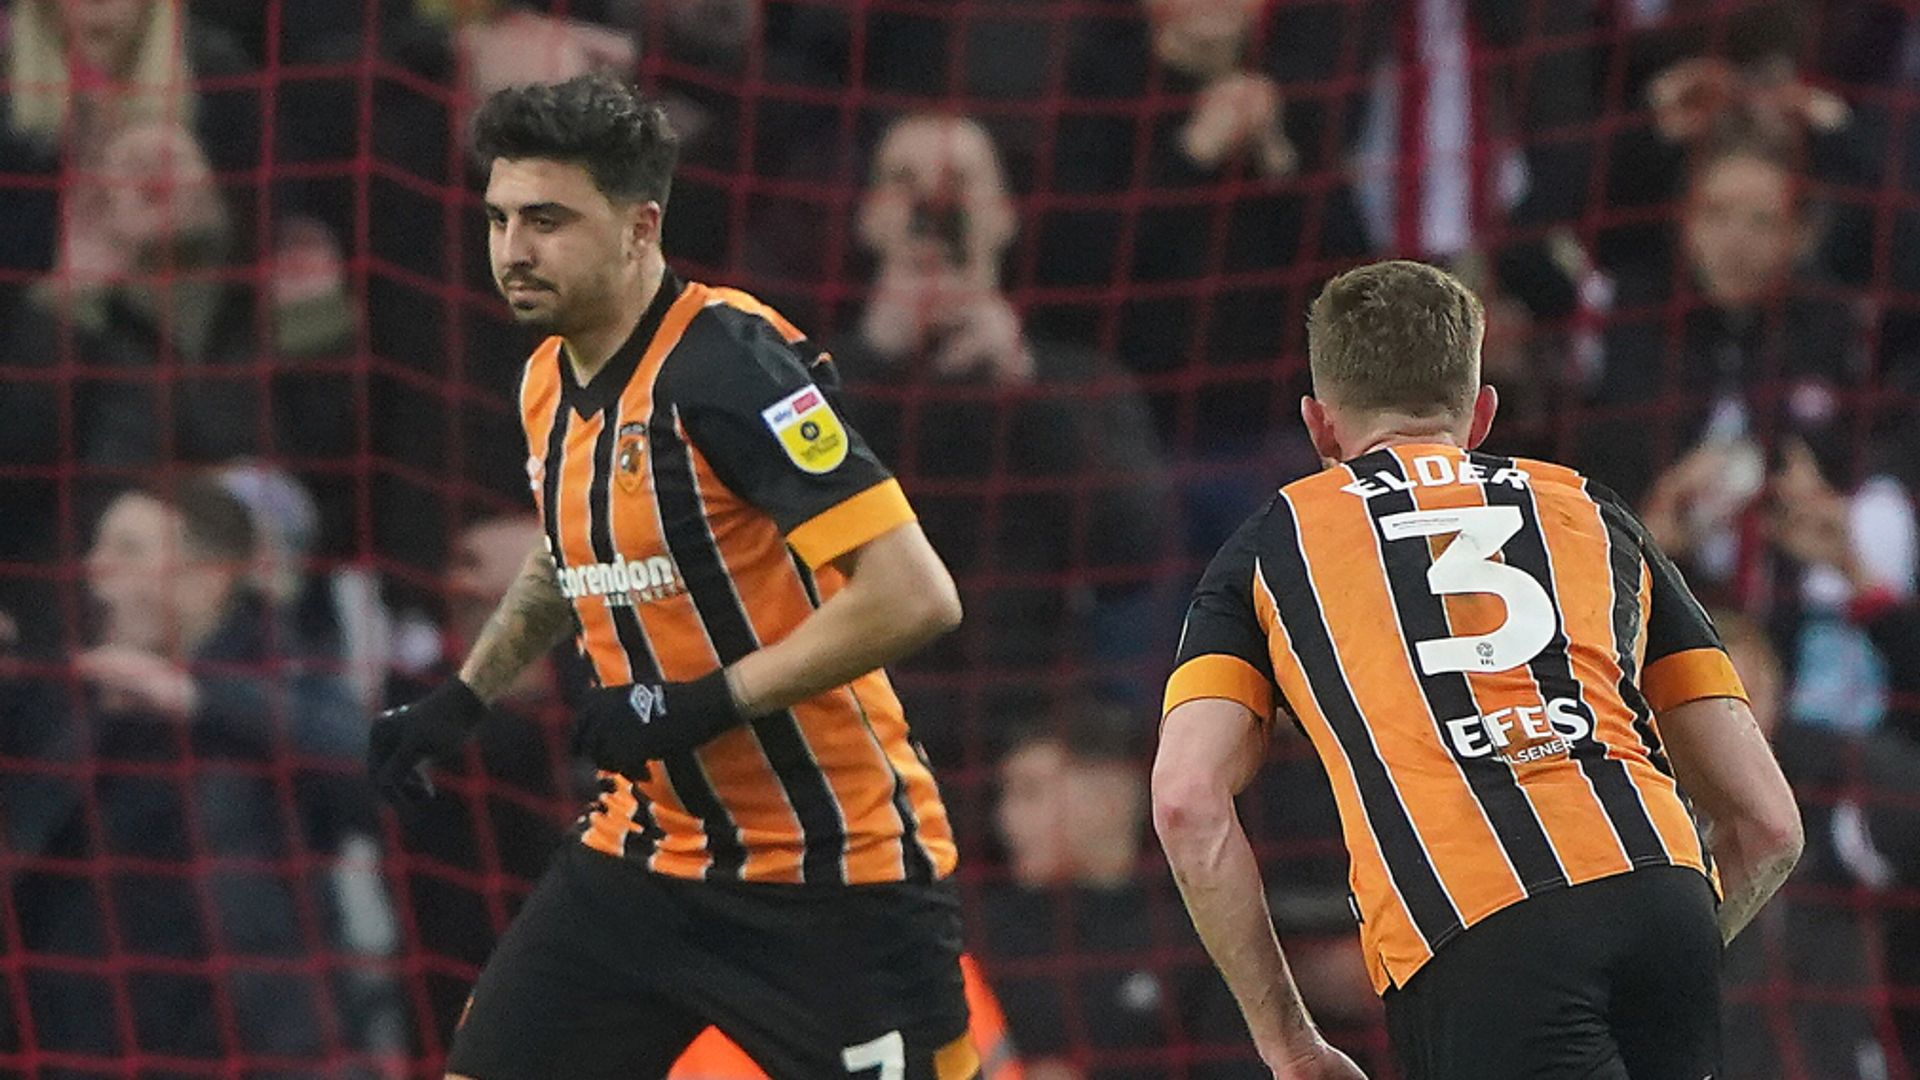 Tufan's late penalty dents Sunderland's play-off hopes in thriller